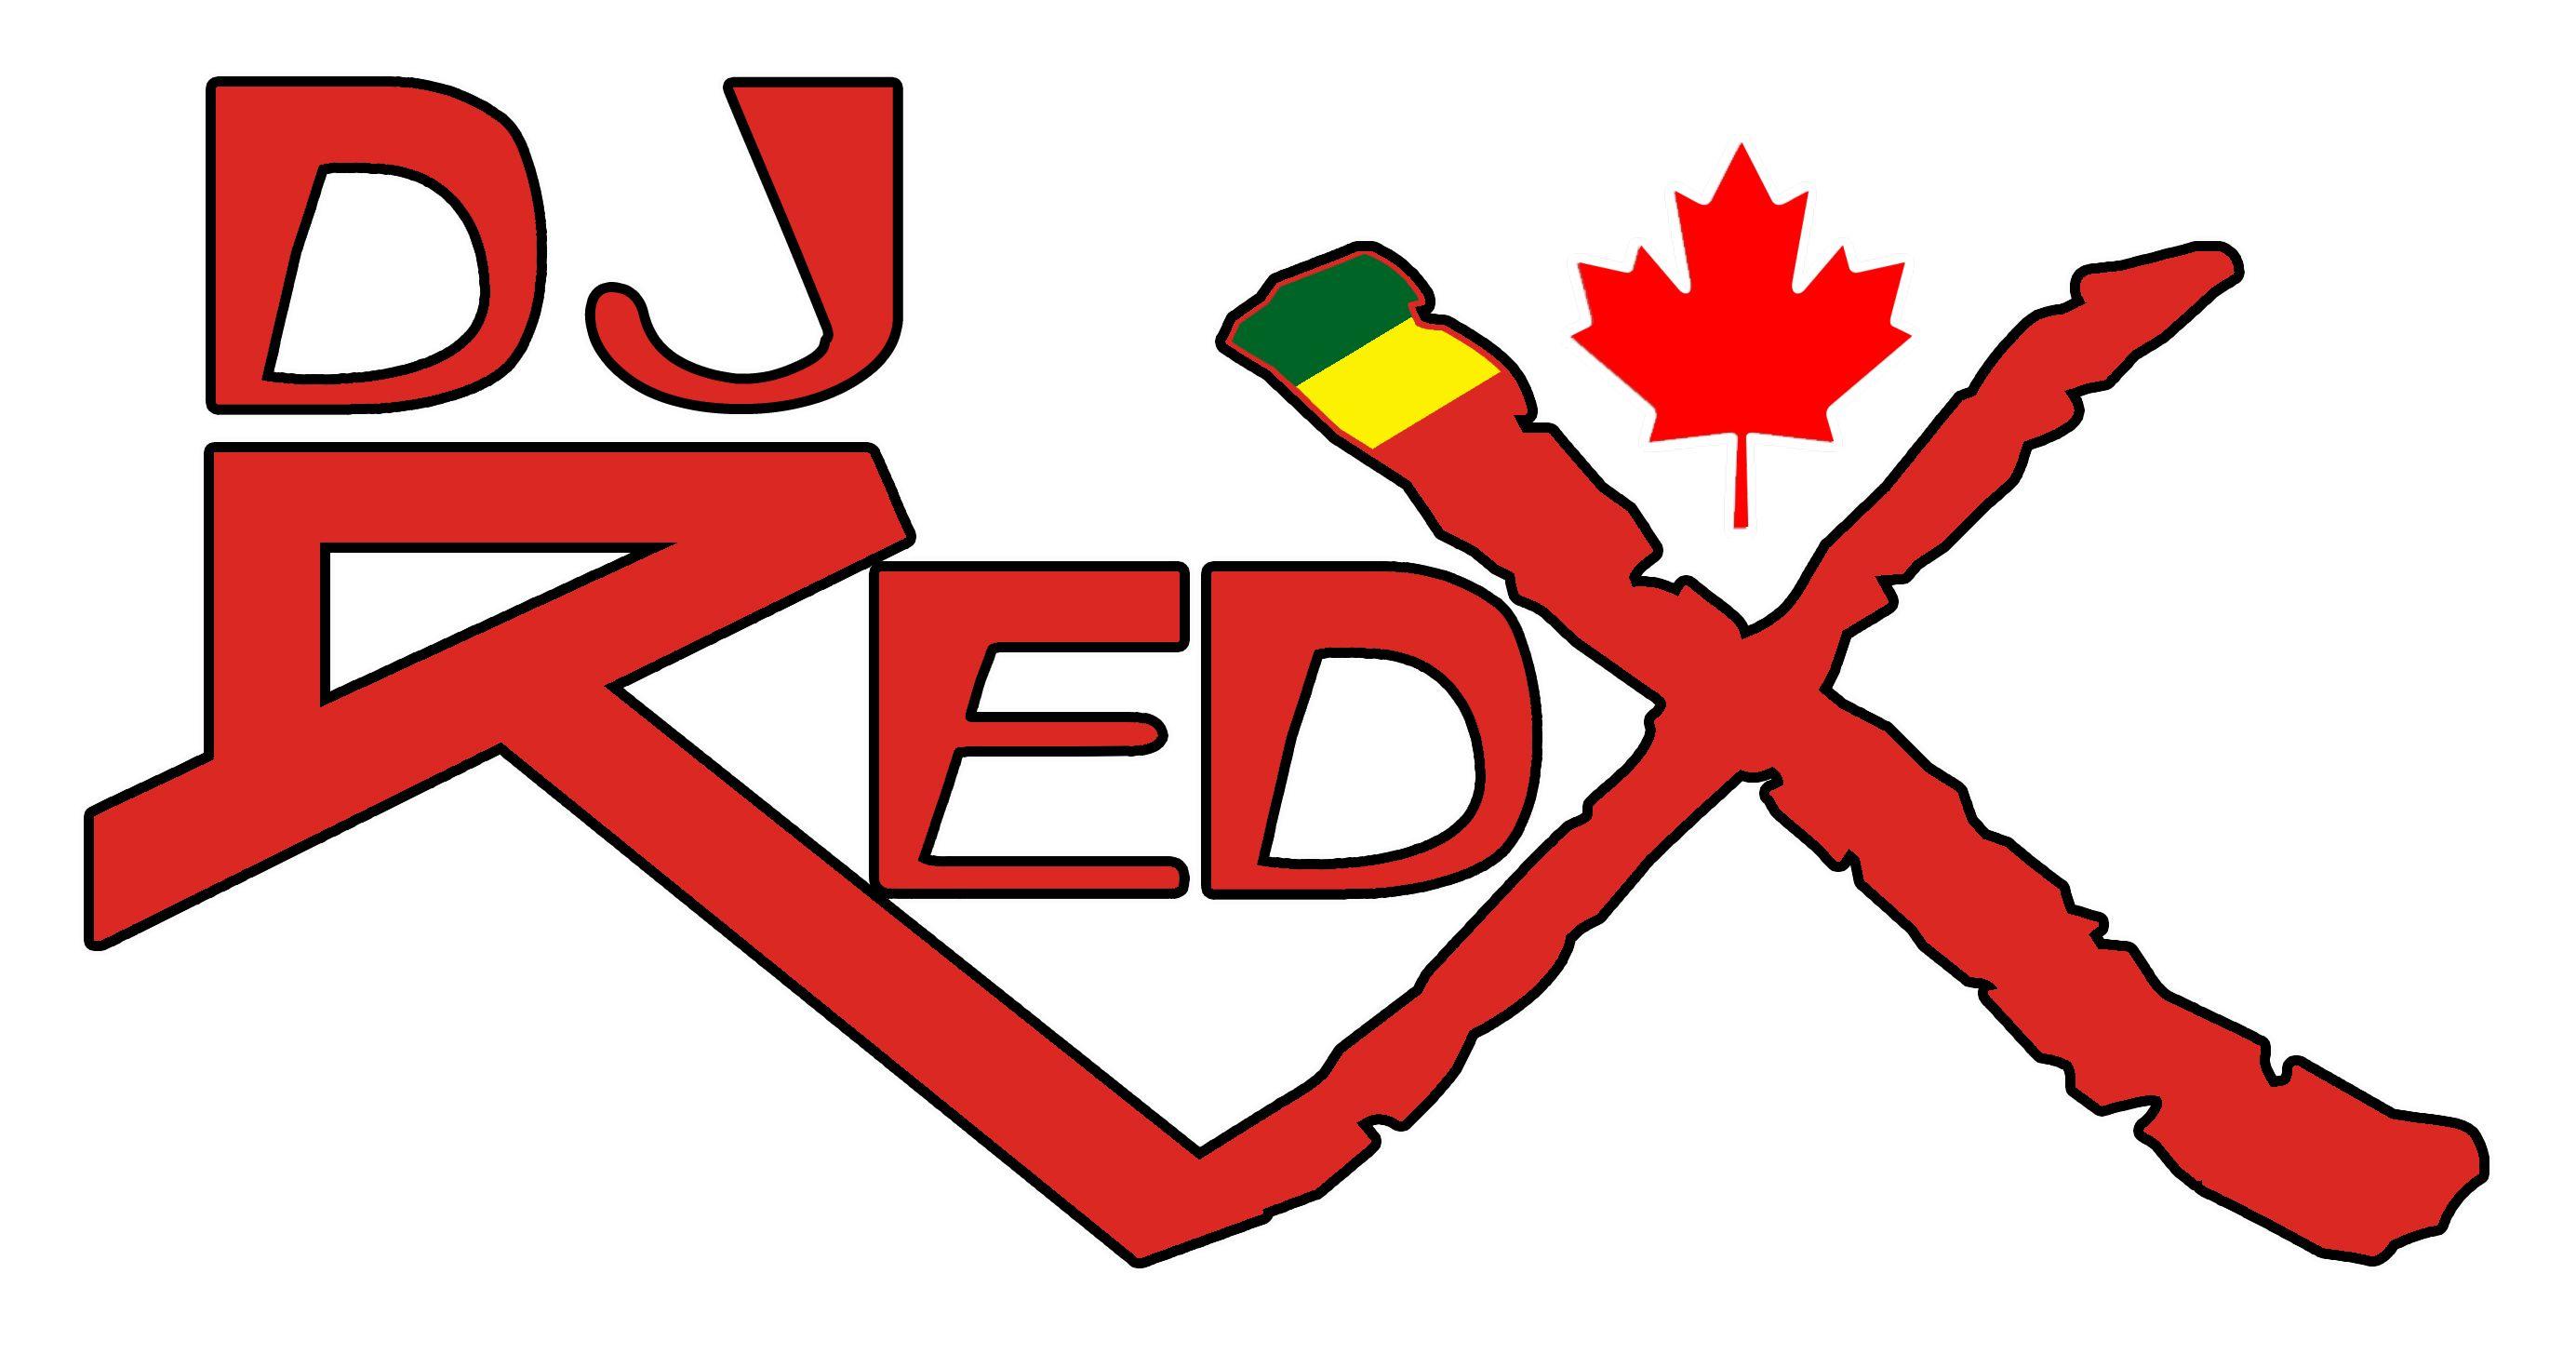 Red XX Logo - DJ Red X - The Musical Mash Up